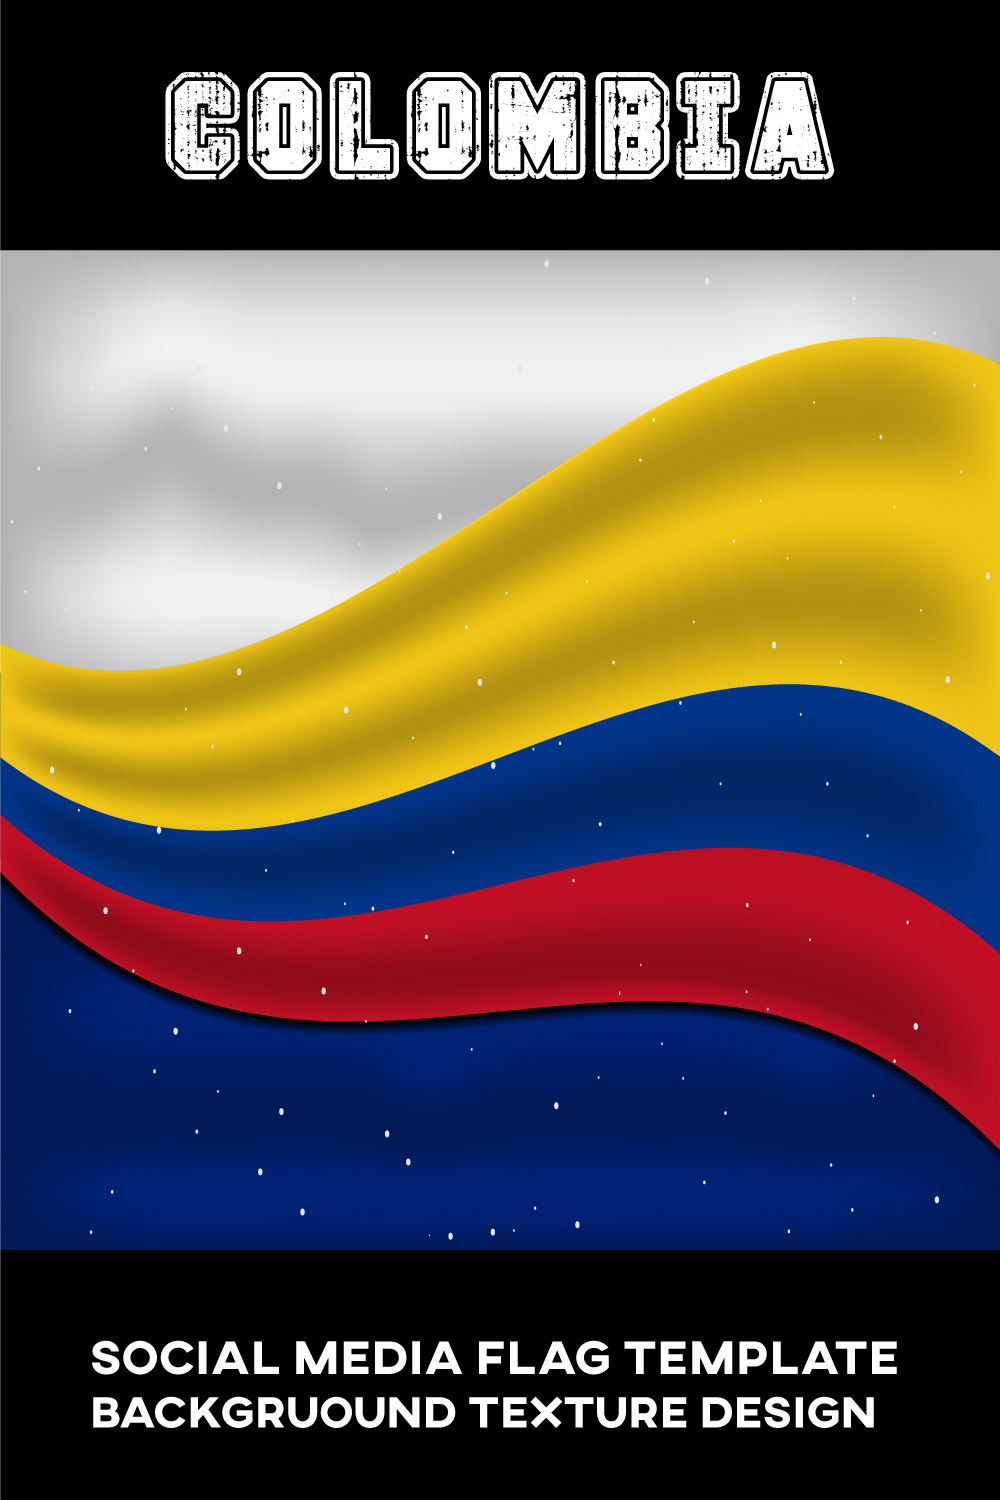 Unique image of the flag of Colombia.